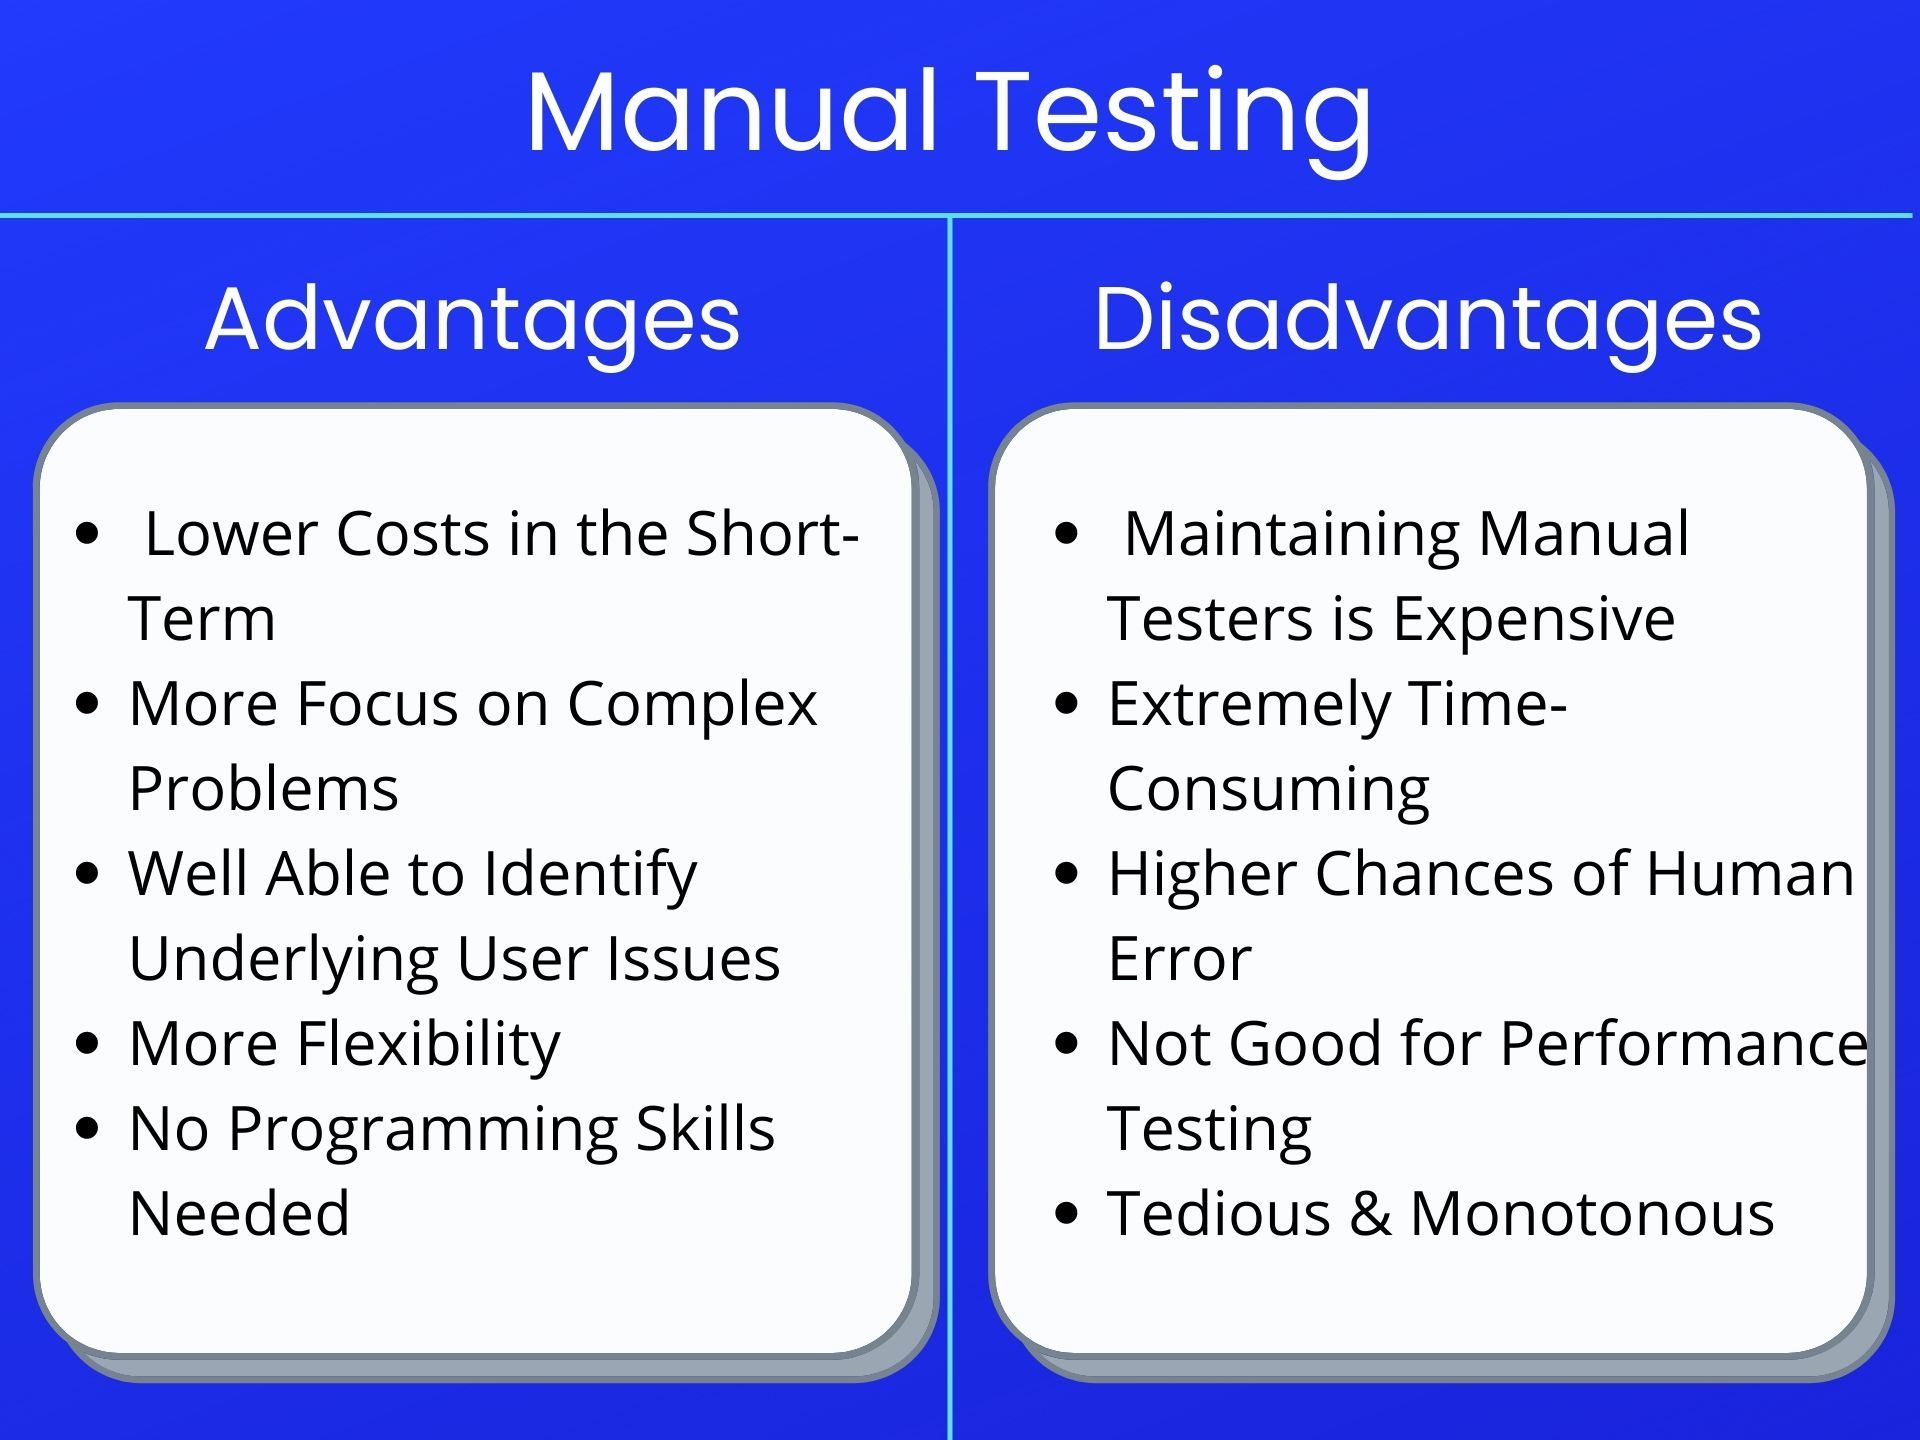 Major Benefits of Automated Testing